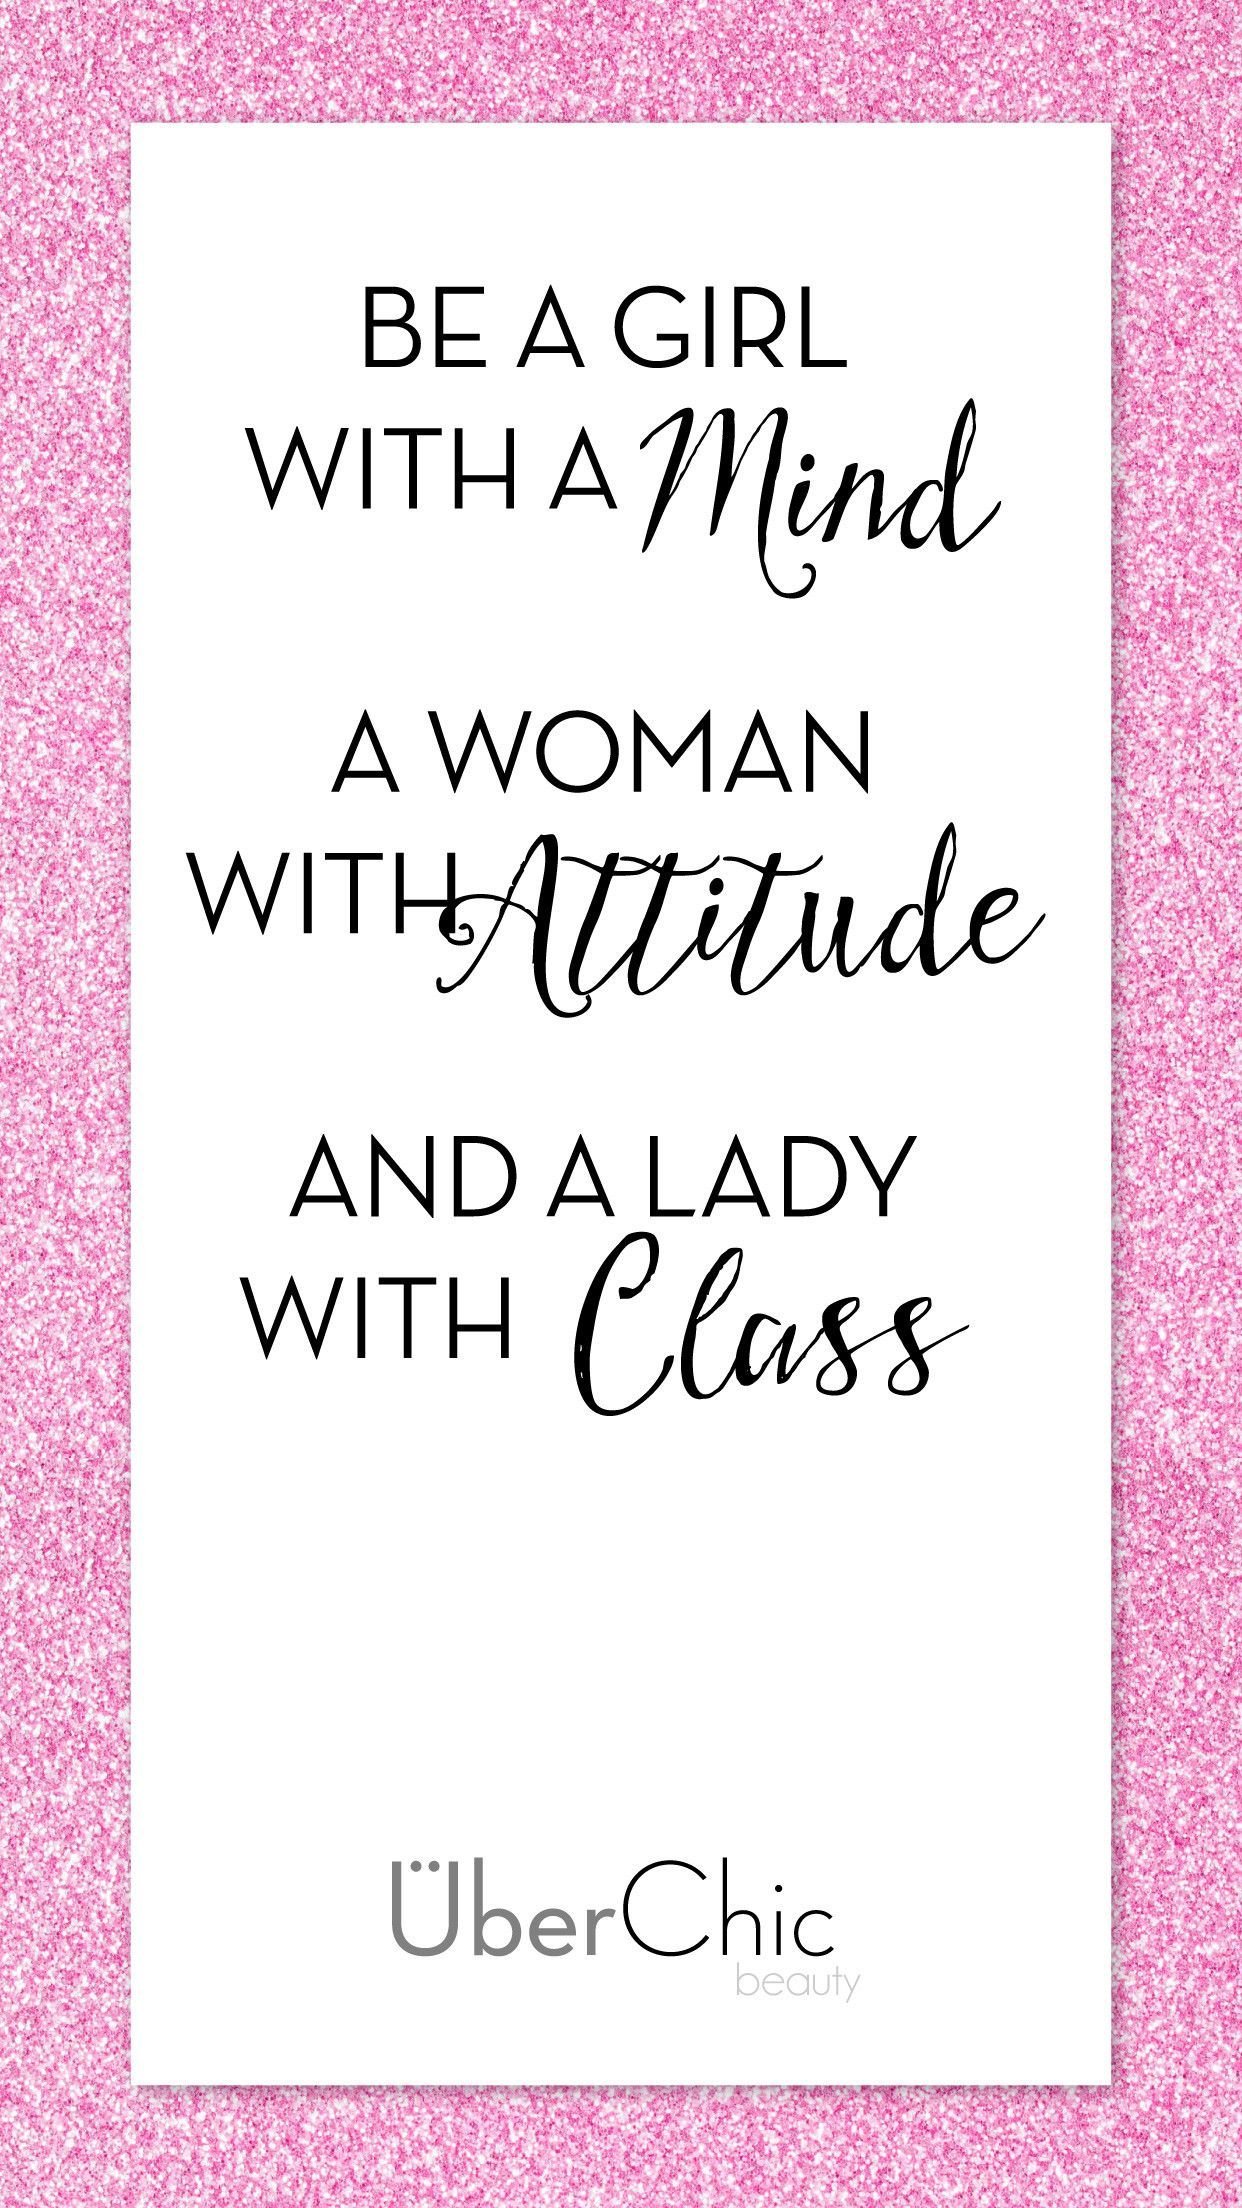 attitude quotes wallpapers for girls